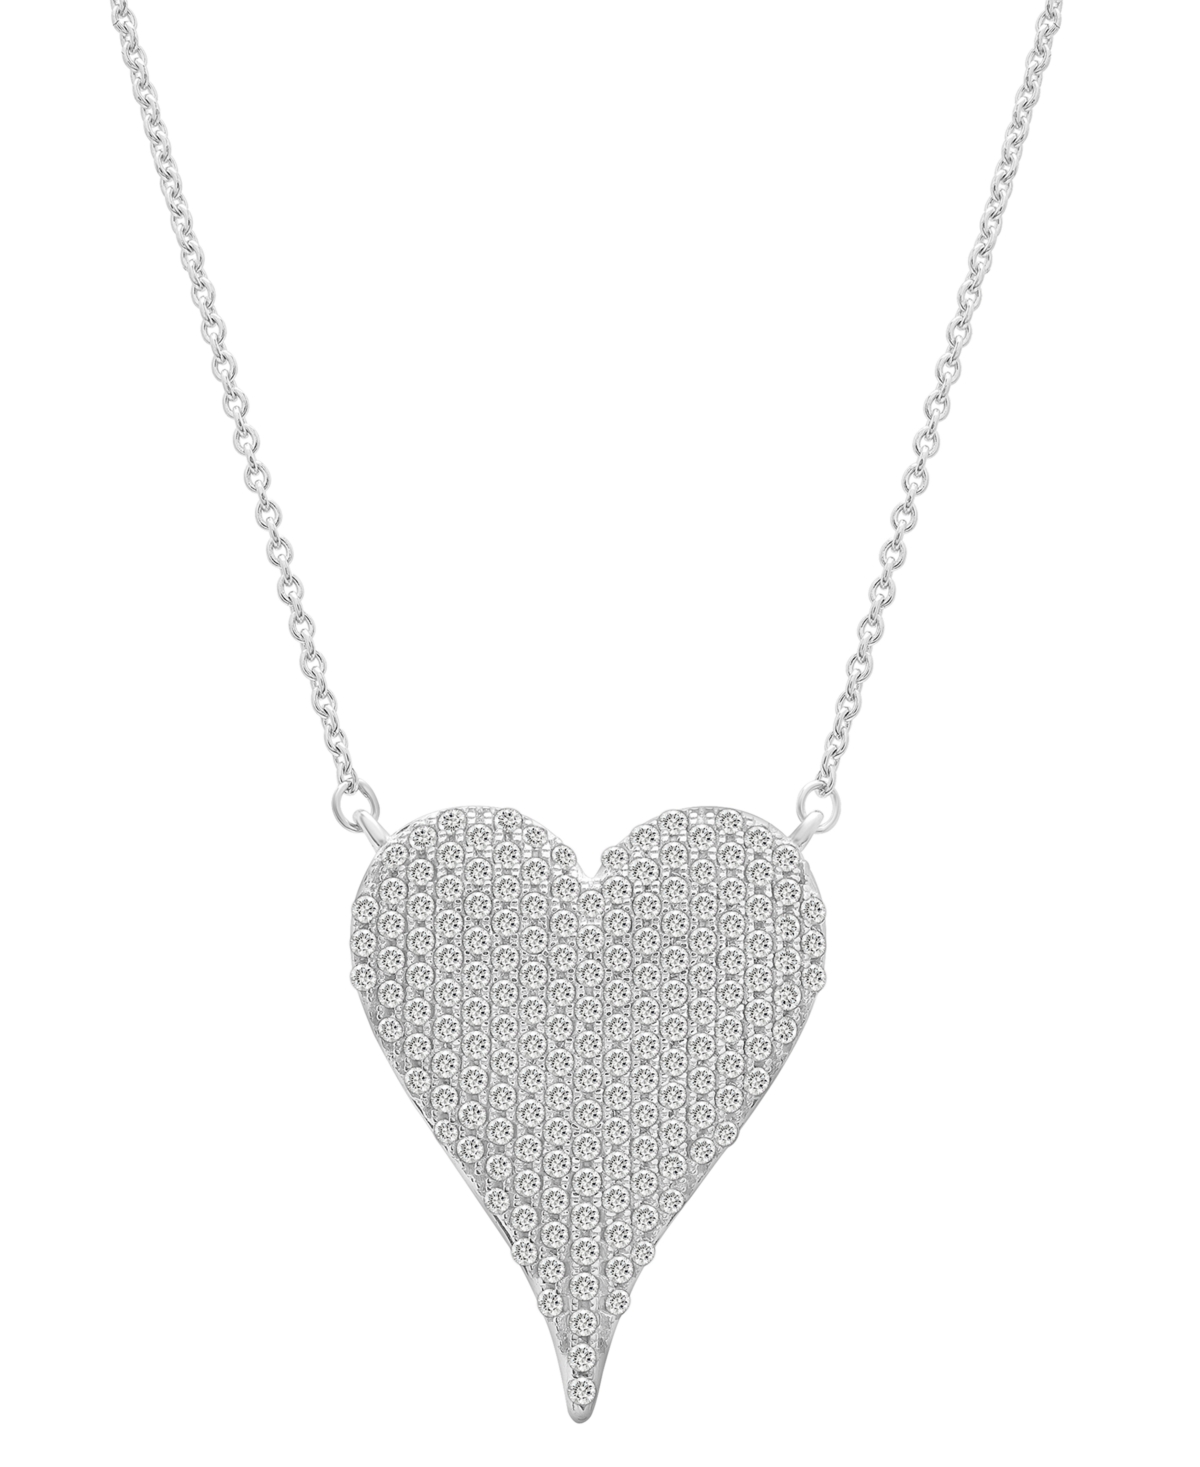 Macy's Diamond Pave Heart Pendant Necklace (1/2 Ct. T.w.) In 14k White Gold, 16" + 2" Extender